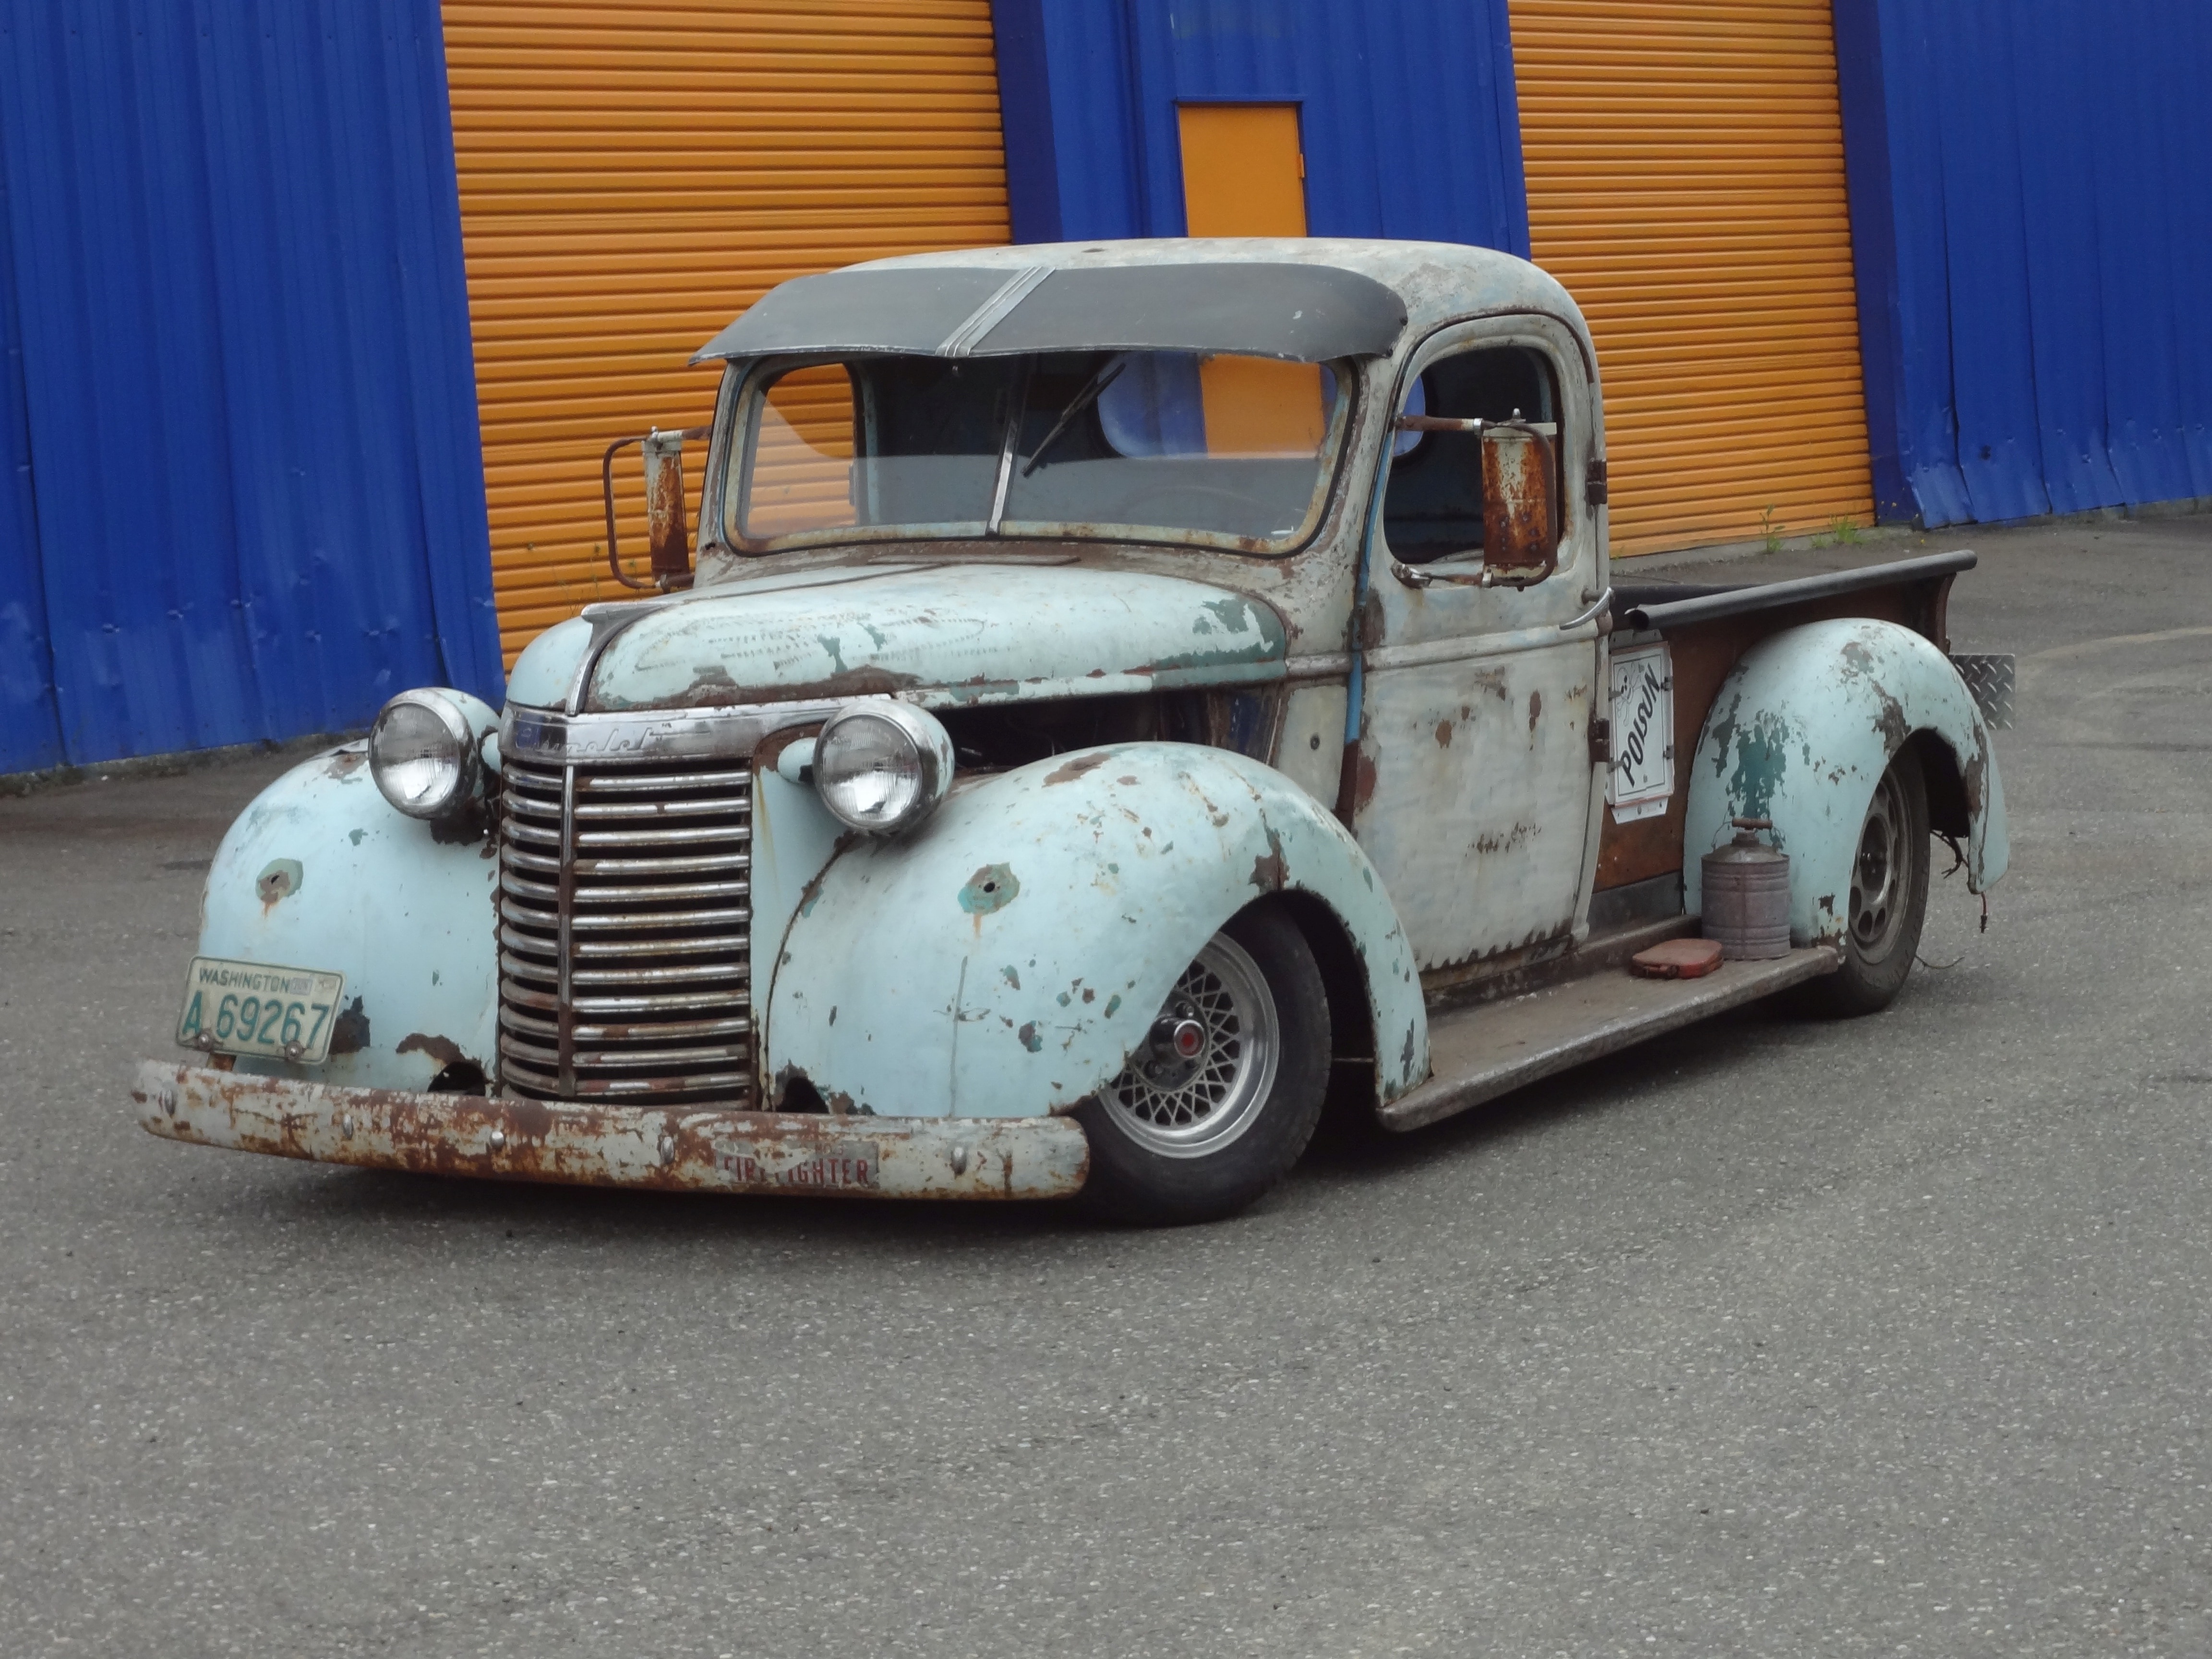 teal and gray classic single cab pickup truck